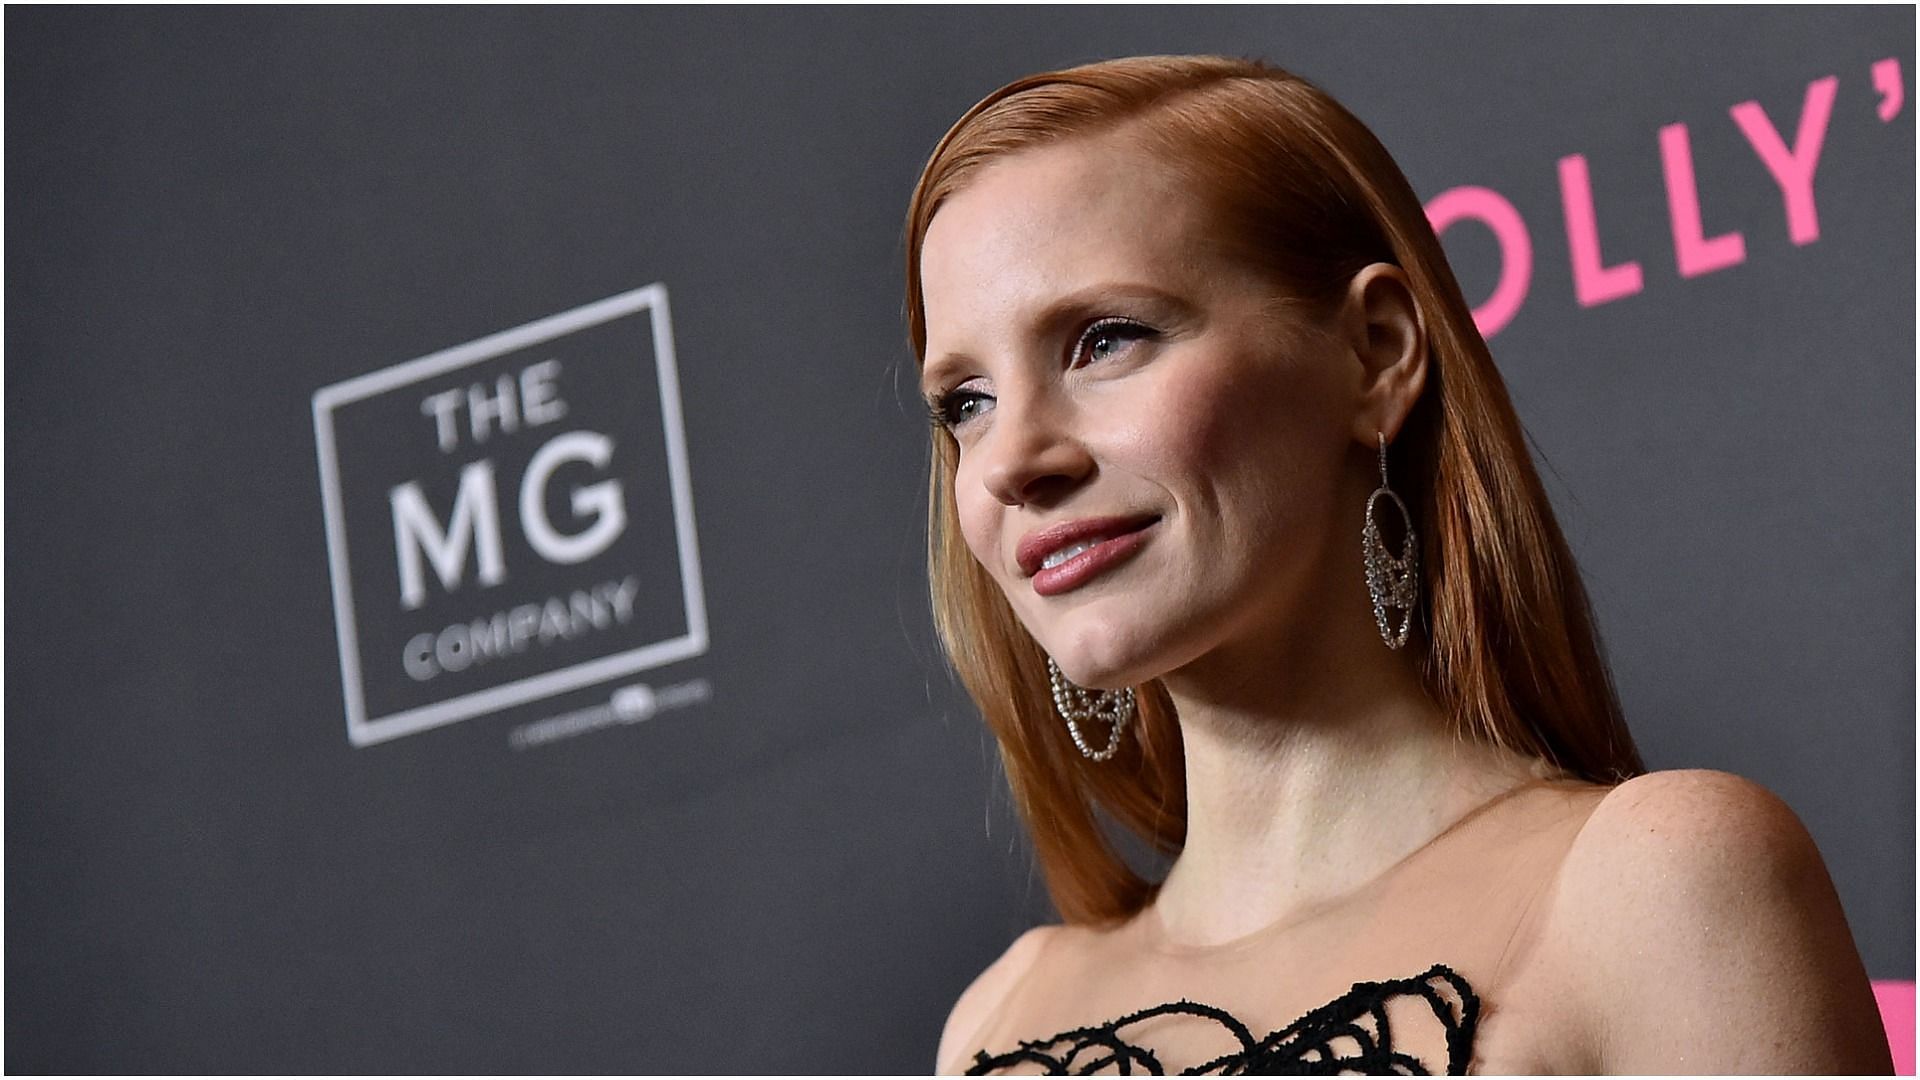 Jessica Chastain talked about her rough upbringing and financial troubles that she and her family went through (Image via Getty Images/Mike Coppola)